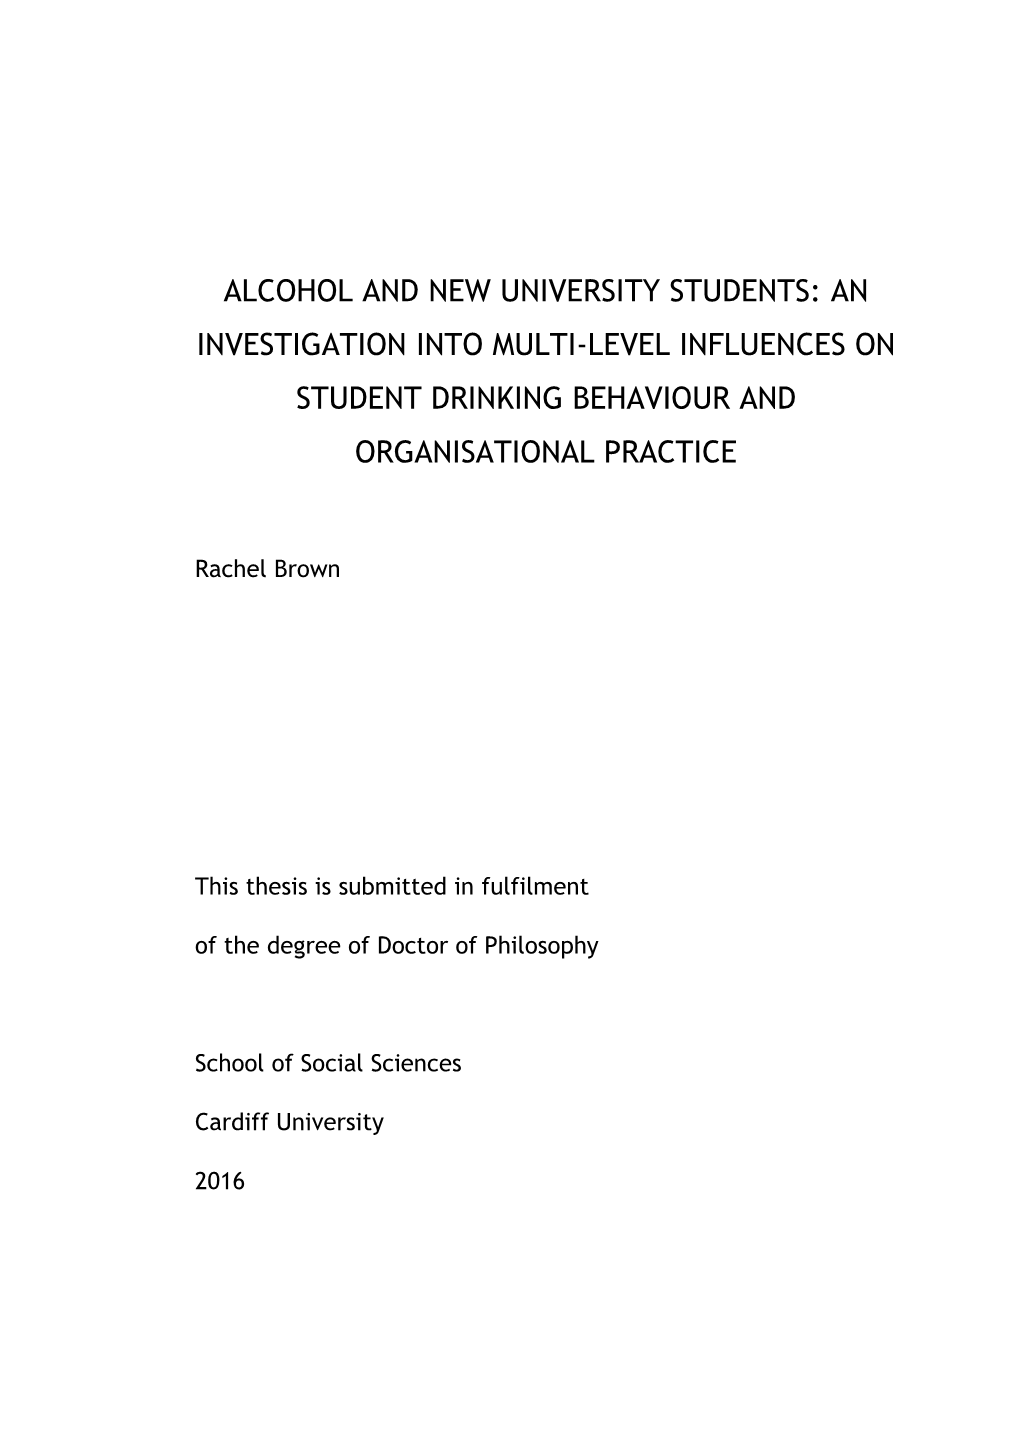 Alcohol and New University Students: an Investigation Into Multi-Level Influences on Student Drinking Behaviour and Organisational Practice